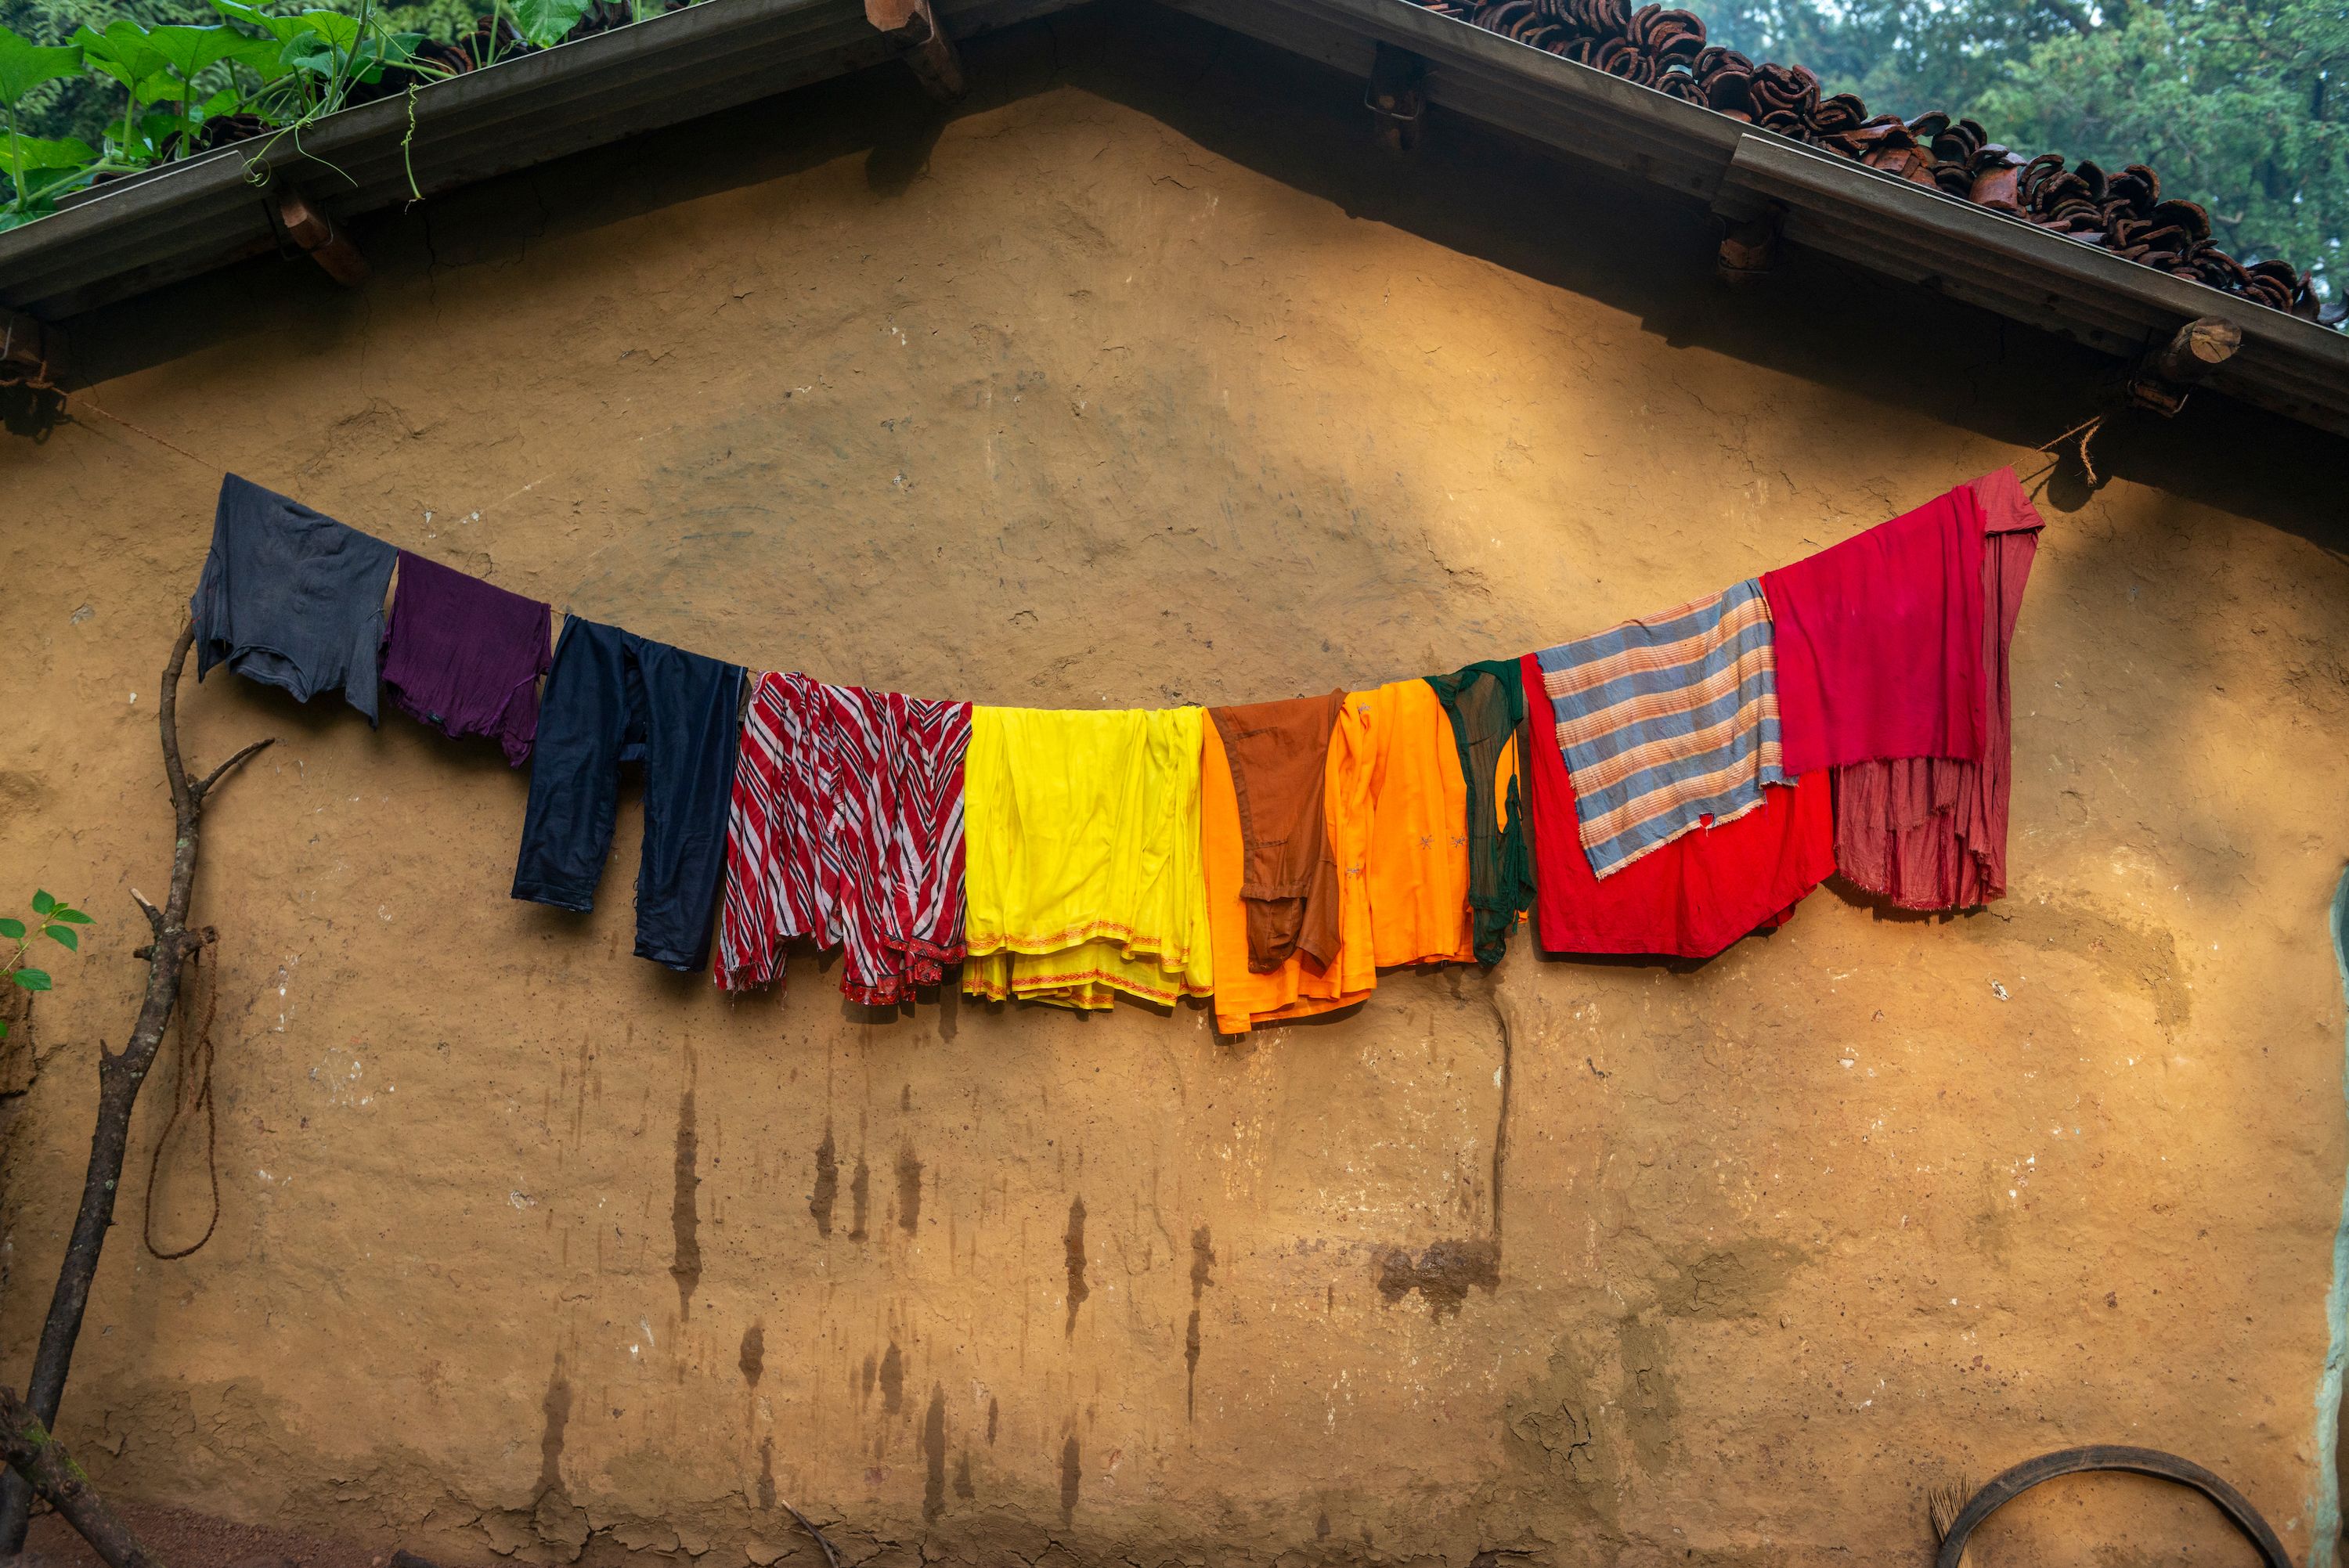 Clothes drying outside a house in the Bastar district. Image by Amitrane / Shutterstock. India, 2016.